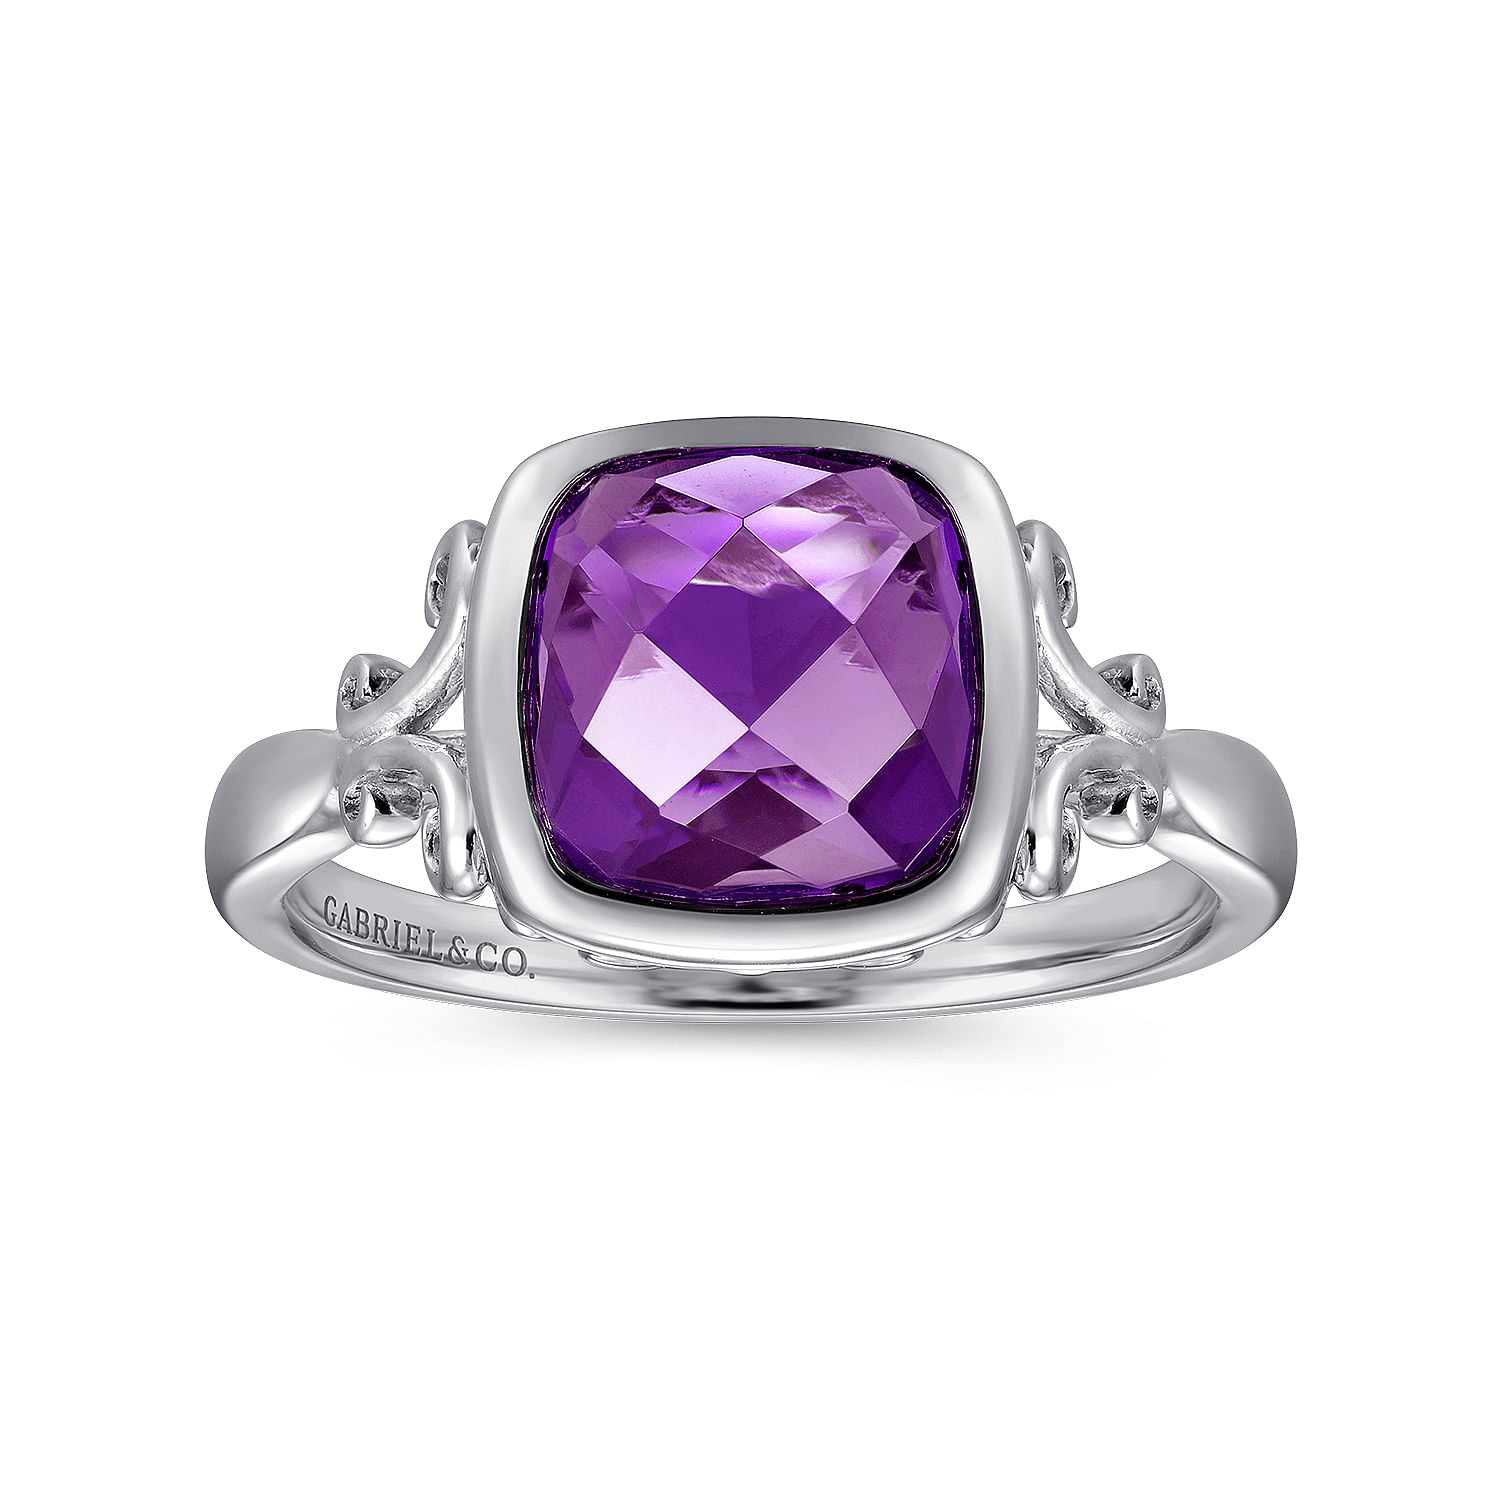 Amethyst Cushion Ring Silver Jewelry Free Shipping Gemstone Ring Purple Silver Ring Stacking Ring 925 Sterling Silver Amethyst Ring